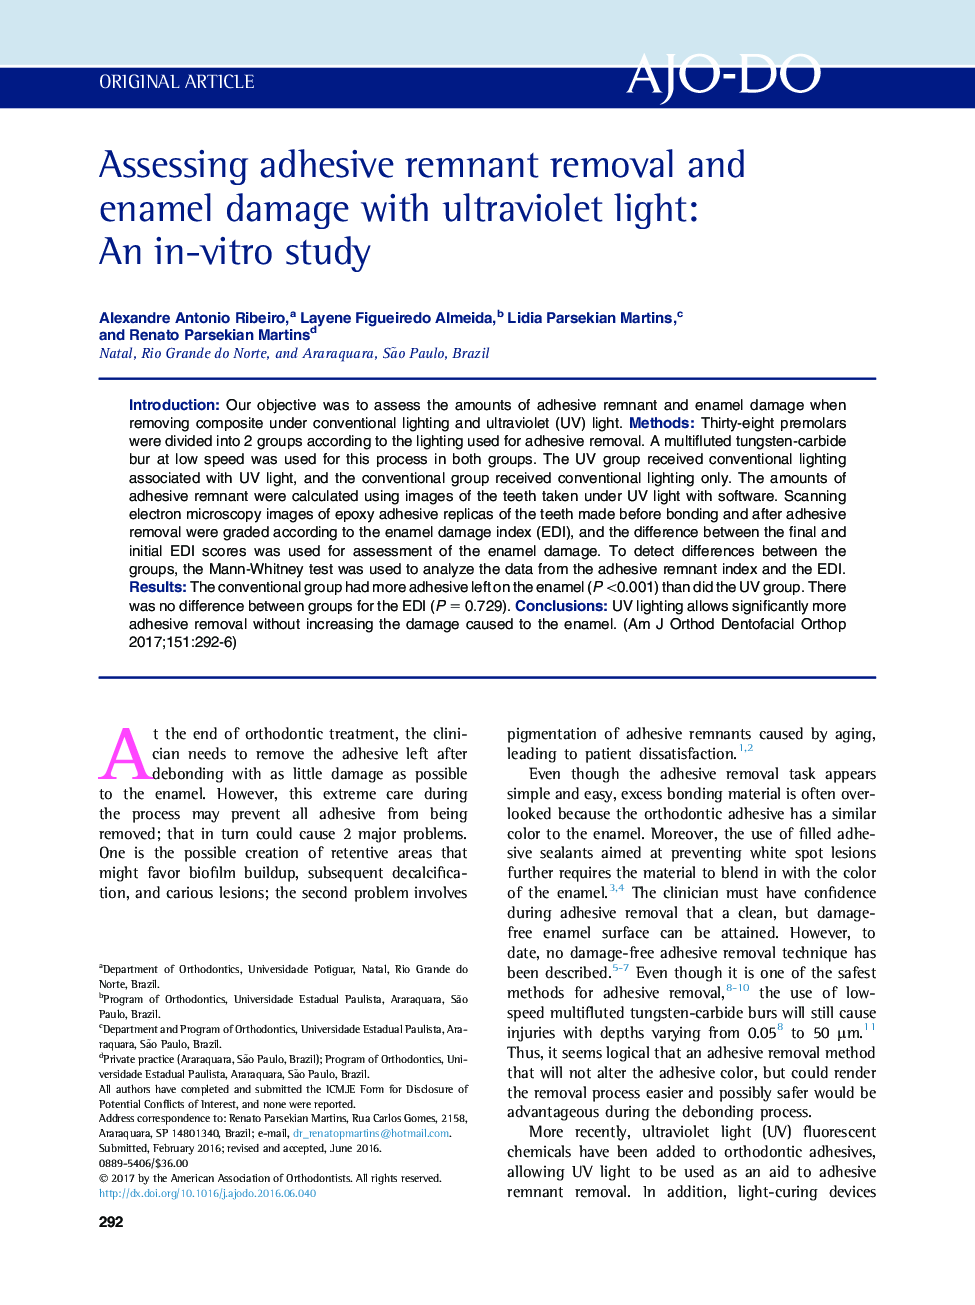 Assessing adhesive remnant removal and enamel damage with ultraviolet light: An in-vitro study